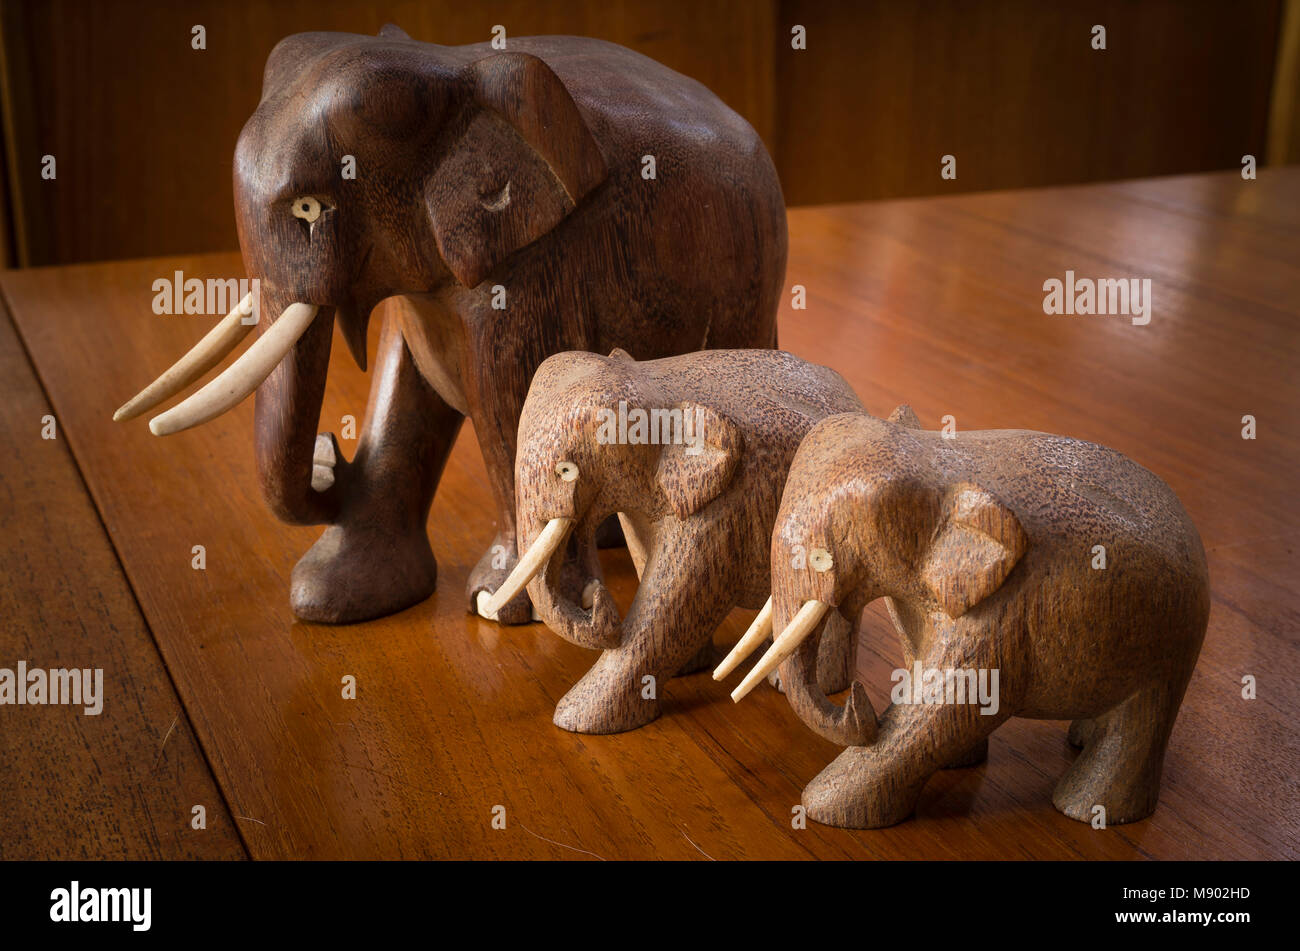 Three wooden elephants collected as souveiers from global travels Stock Photo